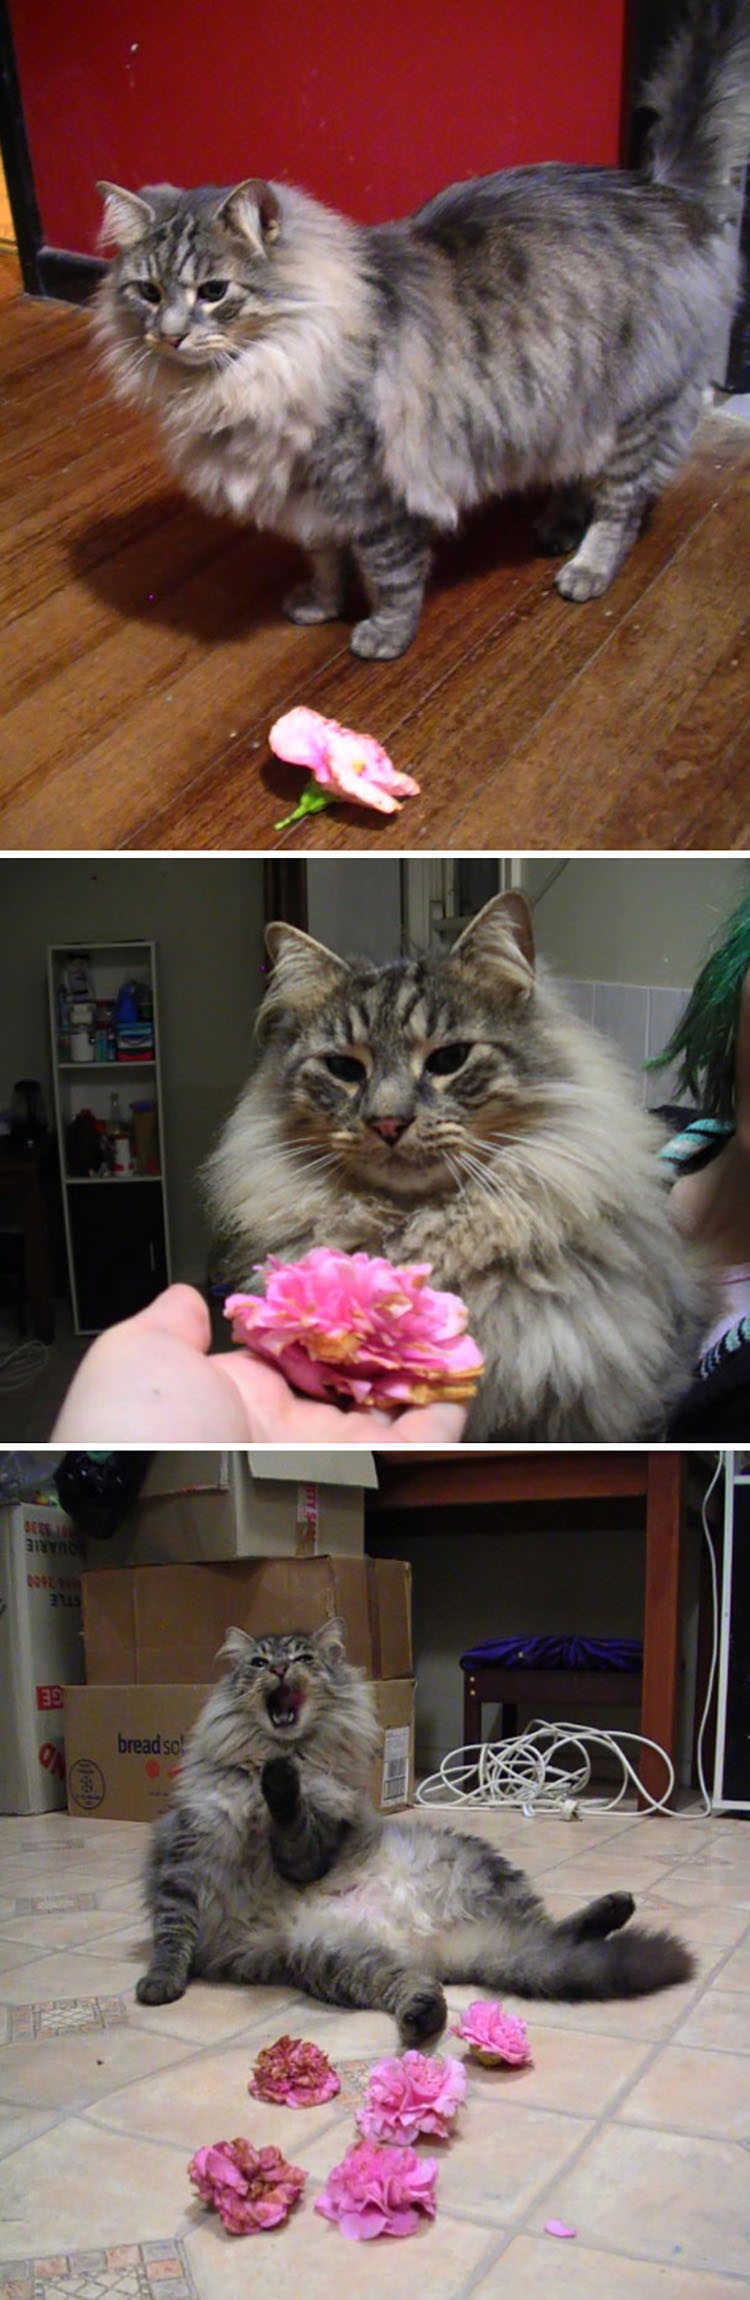 This Is Mr. Slash – A Flower Hunting Adventure Master. He Brings Me Flowers Every Night. He’s Not Hurting The Garden, By The Way